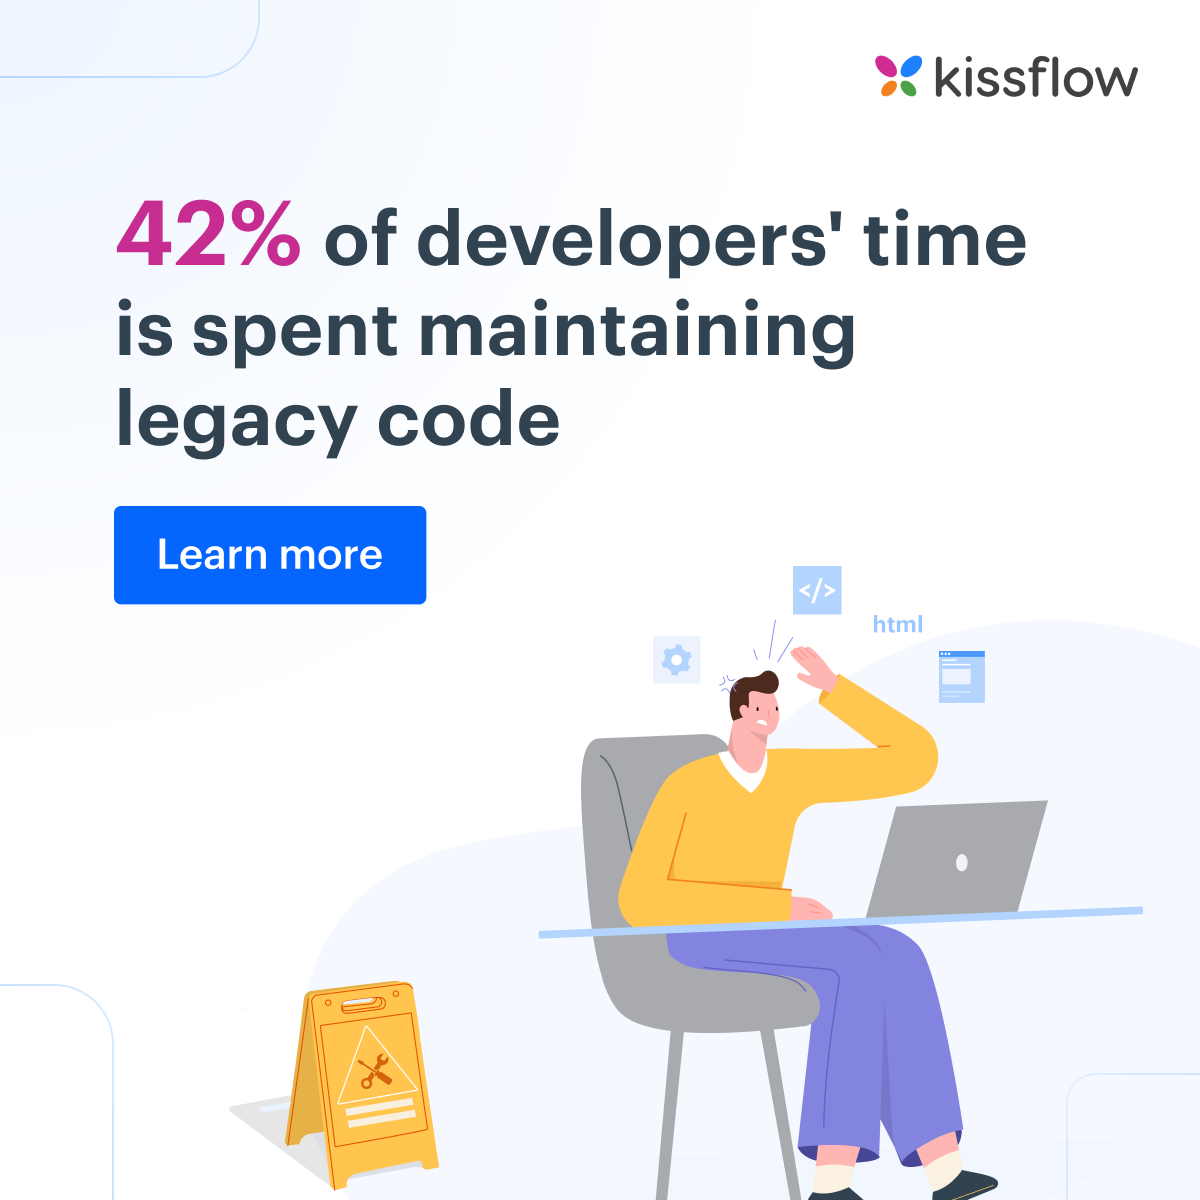 42% of developers time is spent maintaining legacy code